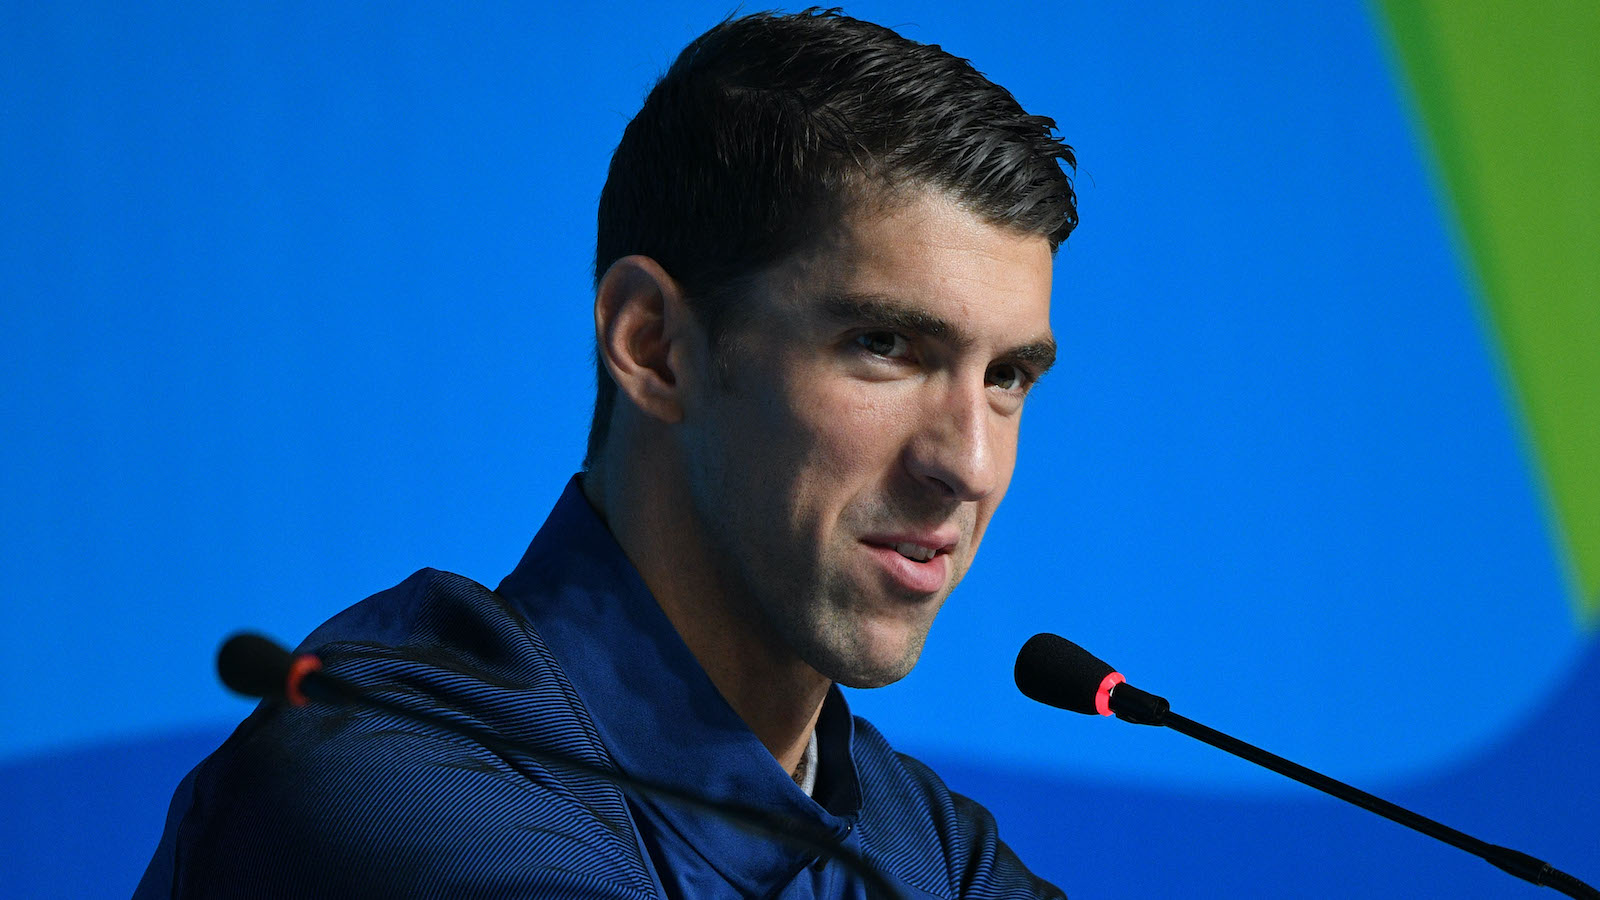 Michael Phelps at an interview